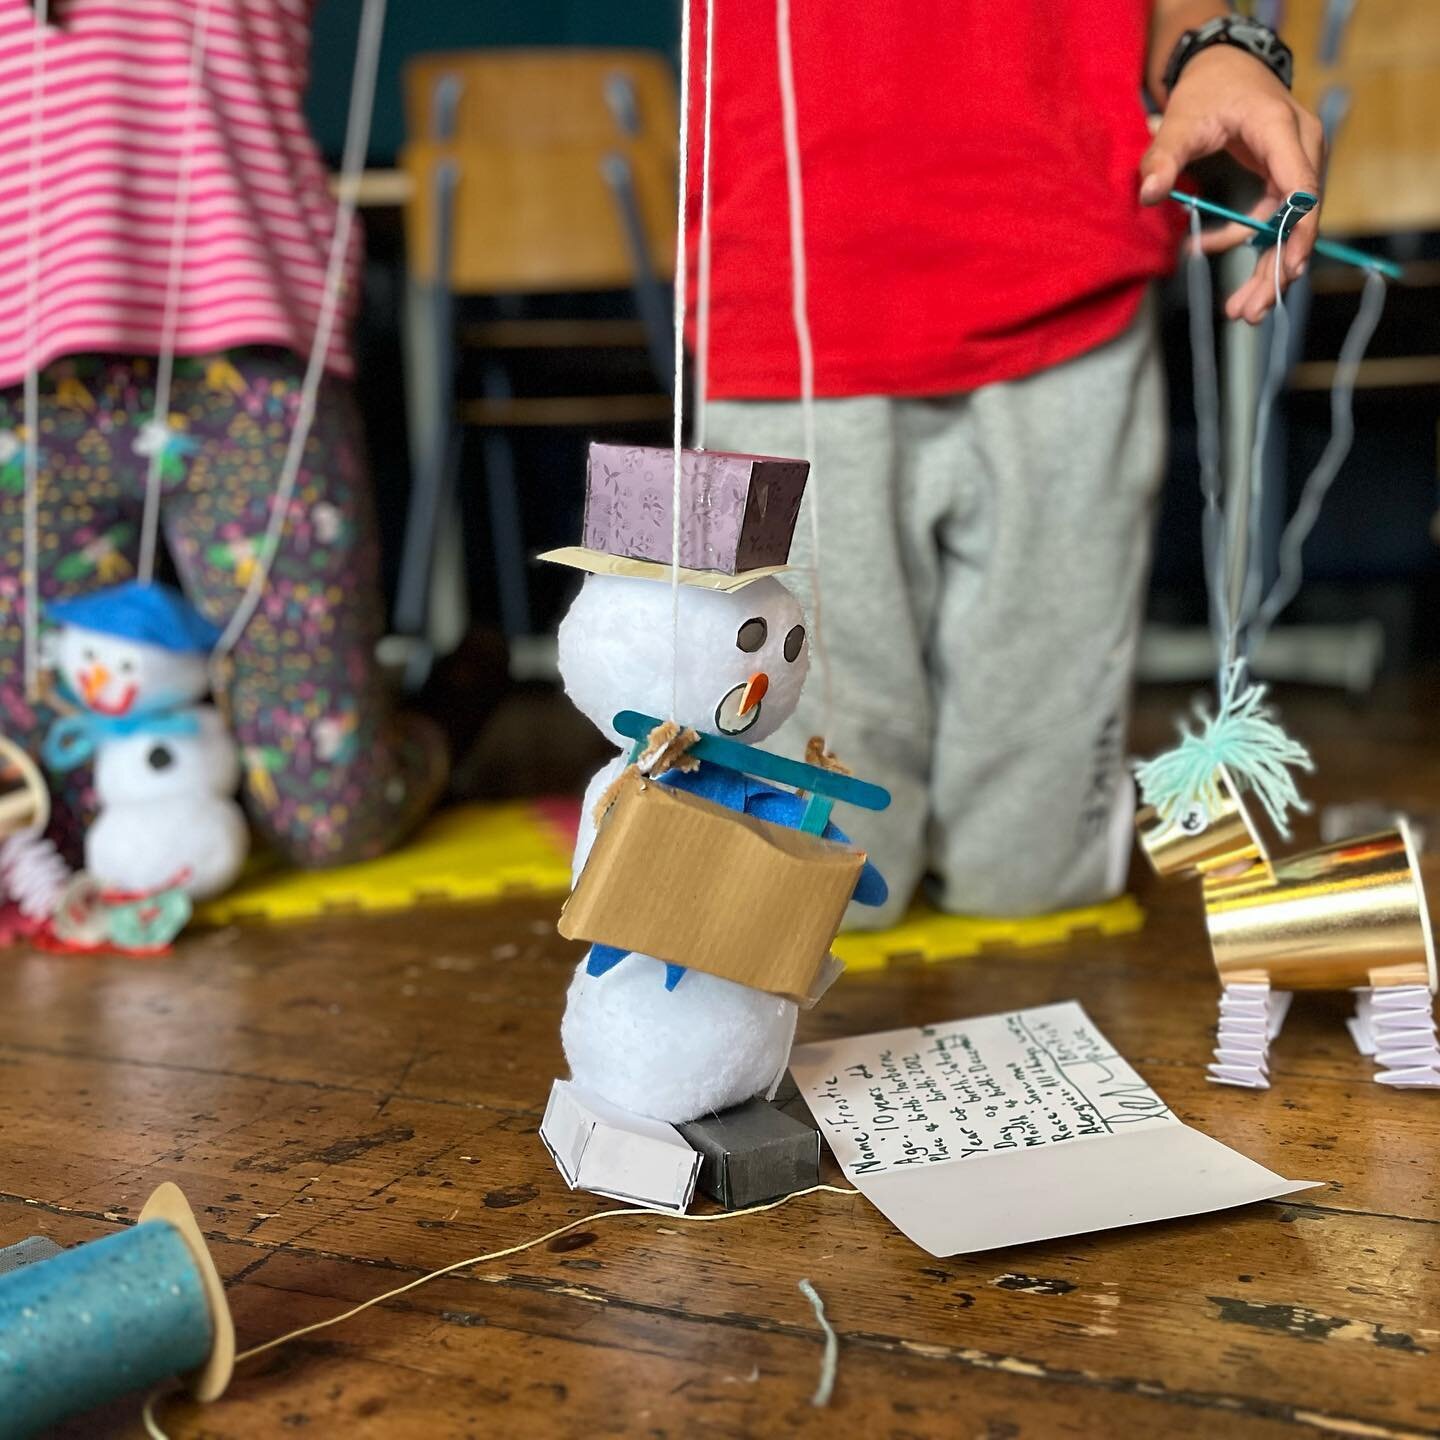 What a morning! Puppet shenanigans all morning at @bostonteapartyharborne . The children let their imaginations and creativity run wild making some brilliant characters with very funny traits and even funnier voices. I am certainly feeling Christmass